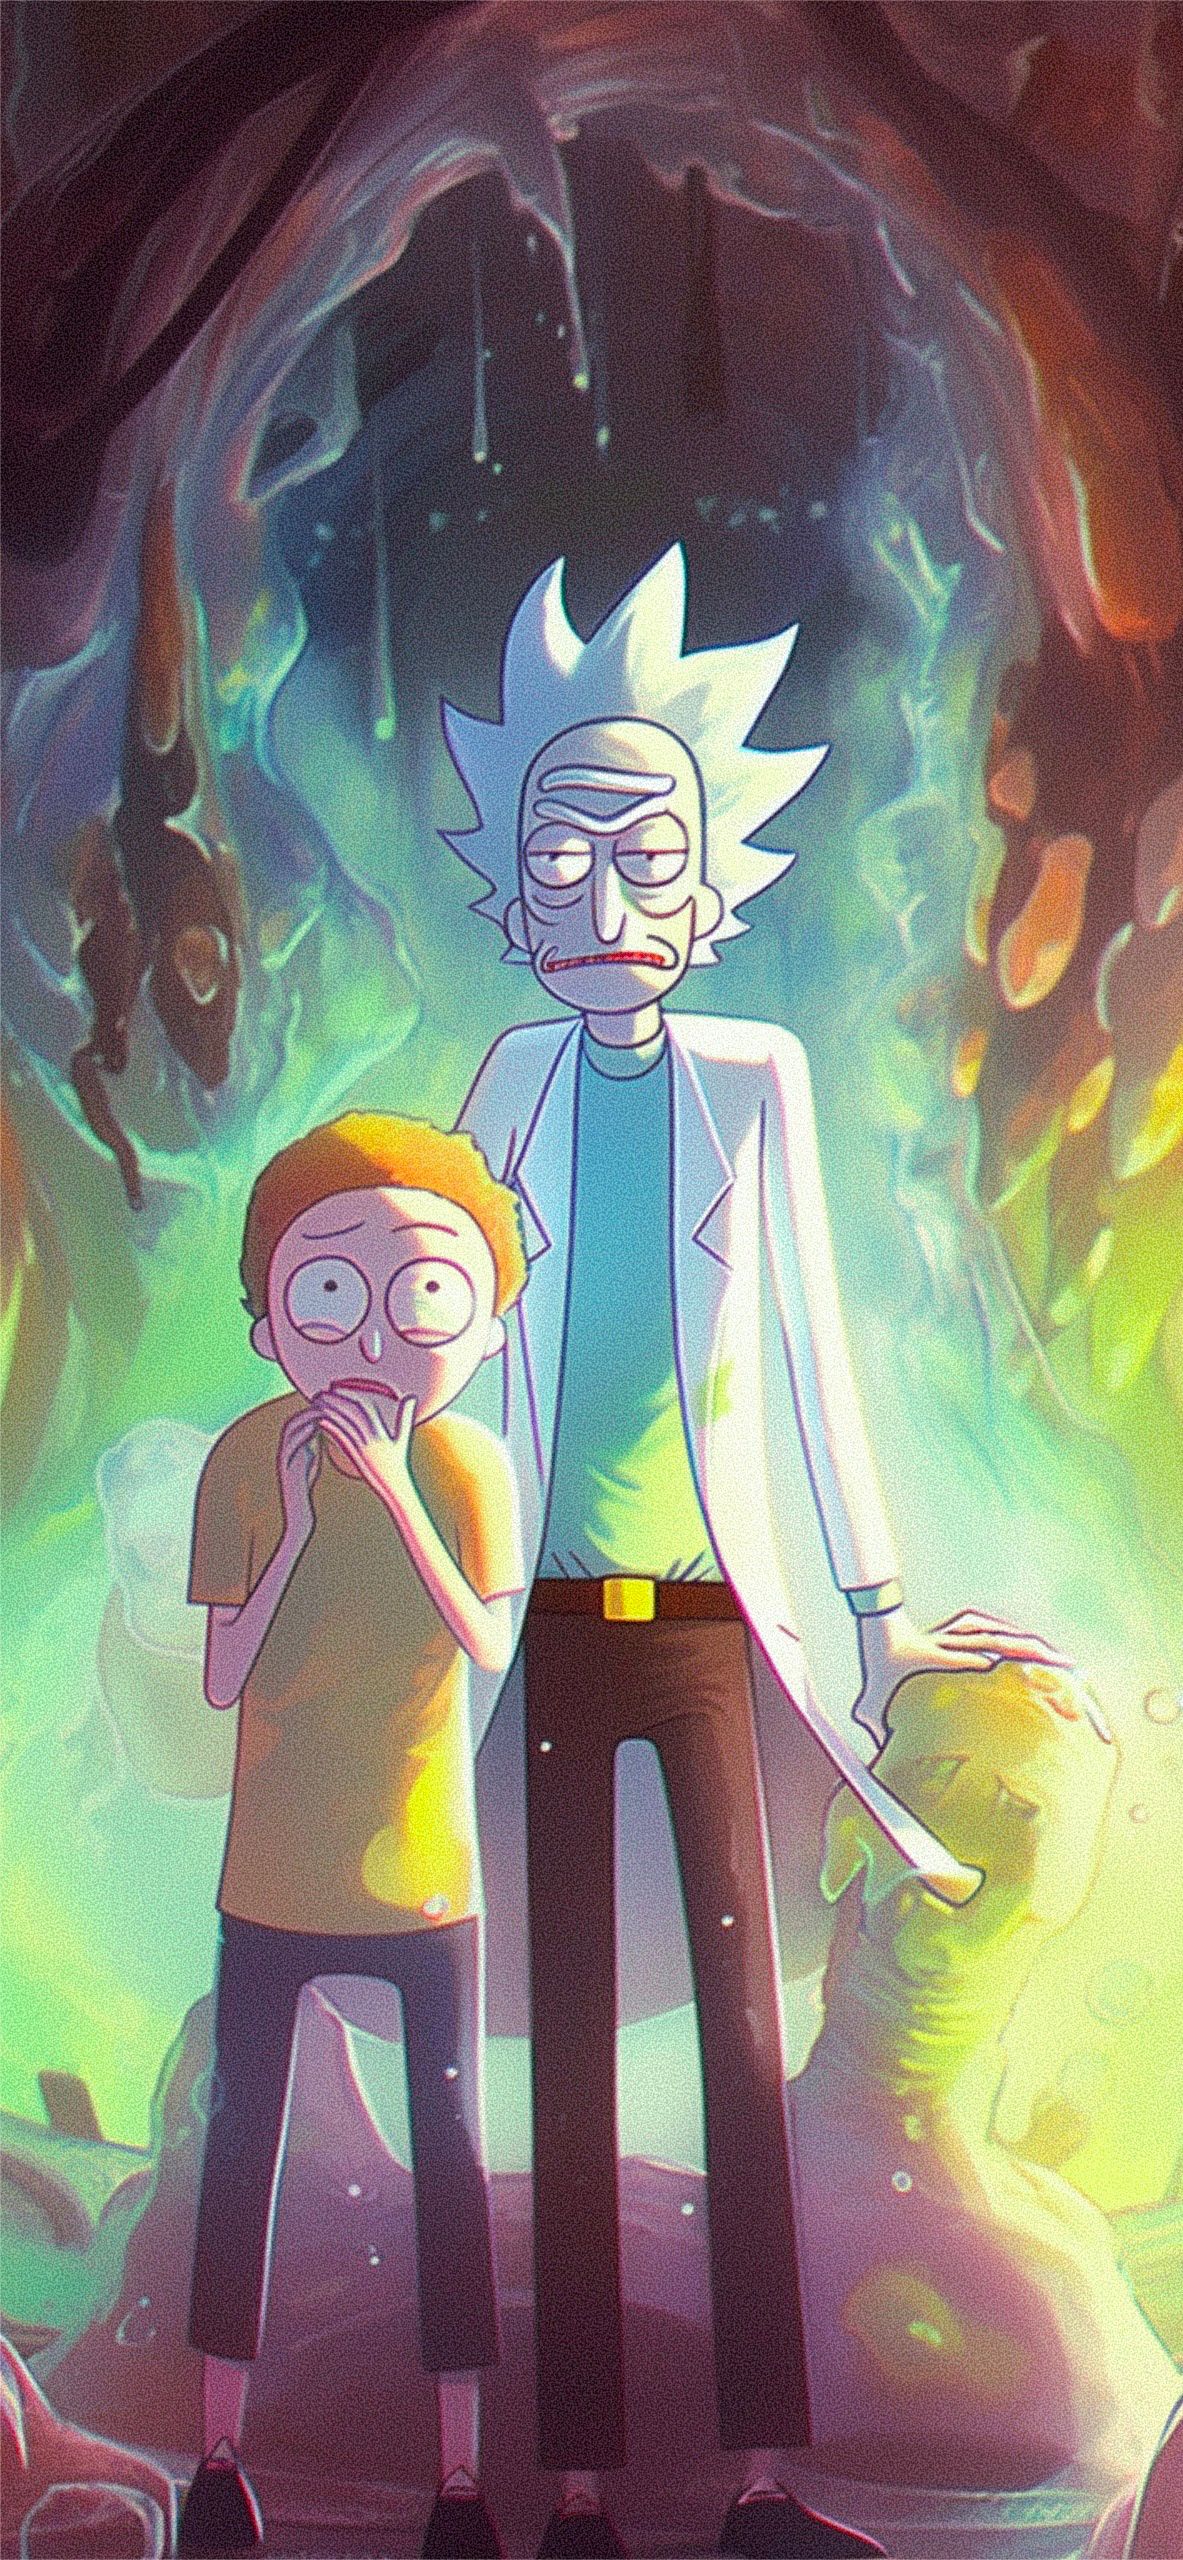 Rick and Morty Slime Cave Wallpaper and Morty Wallpaper